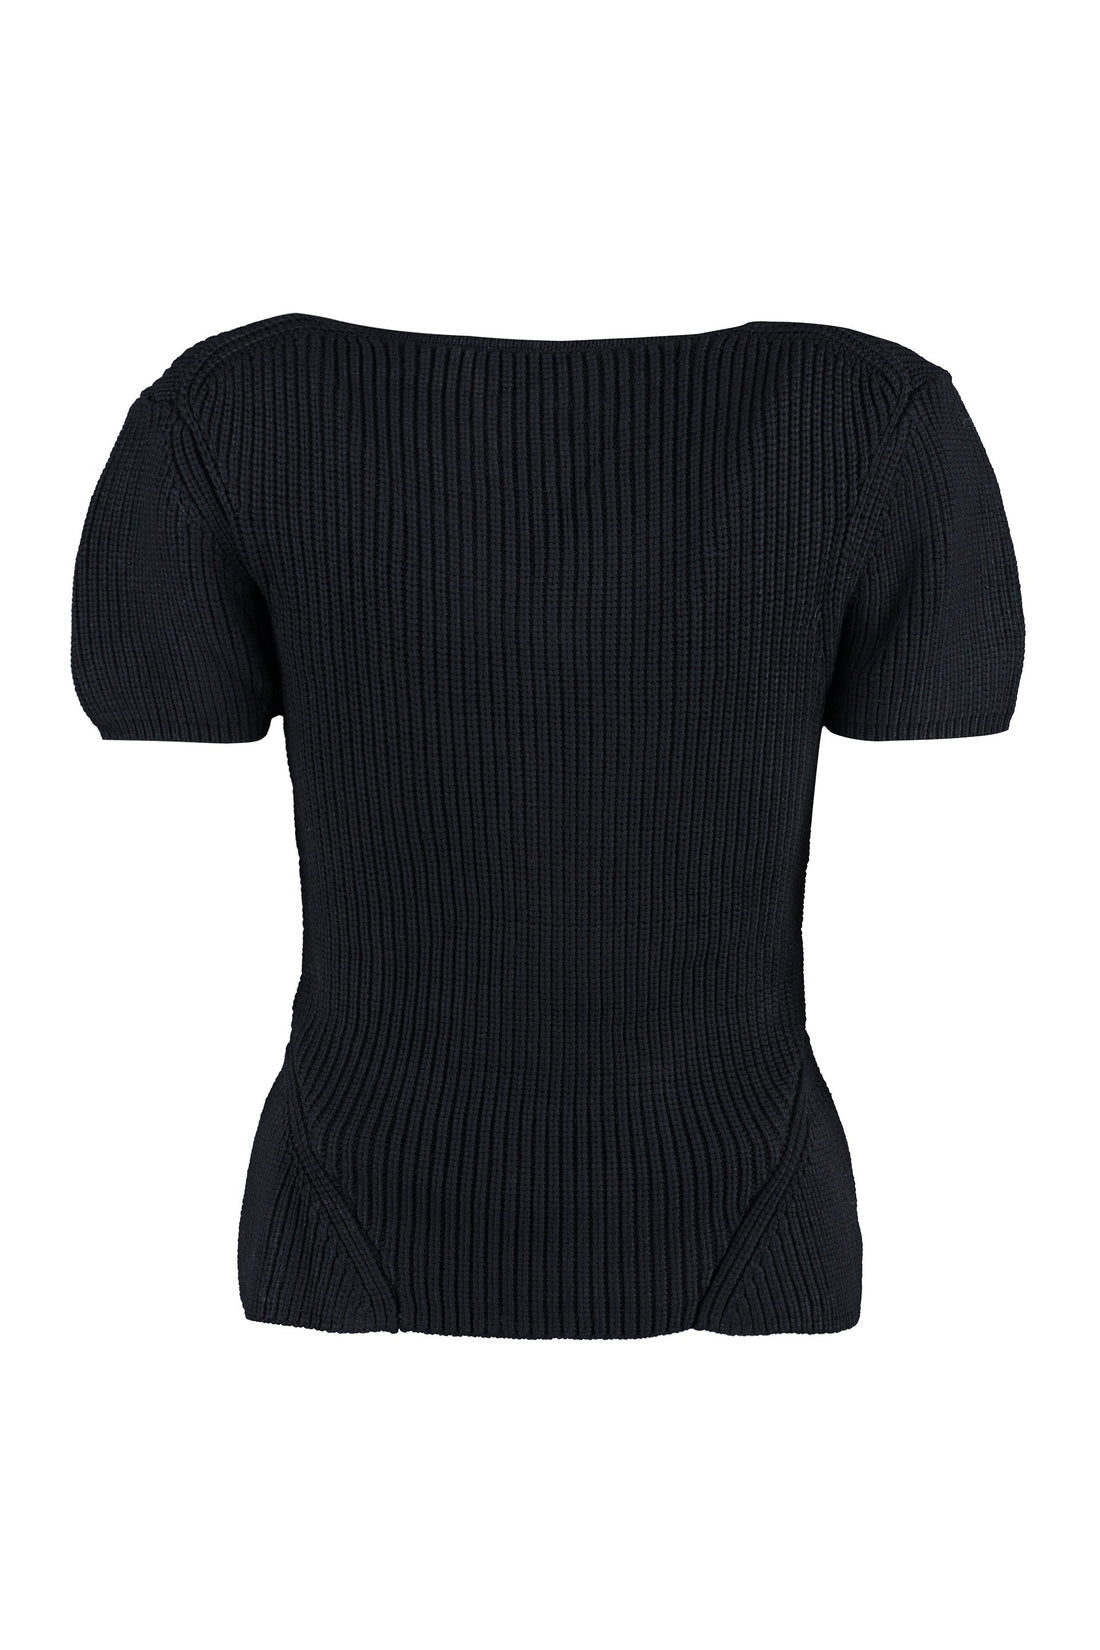 STAUD-OUTLET-SALE-Buxton ribbed knit top-ARCHIVIST